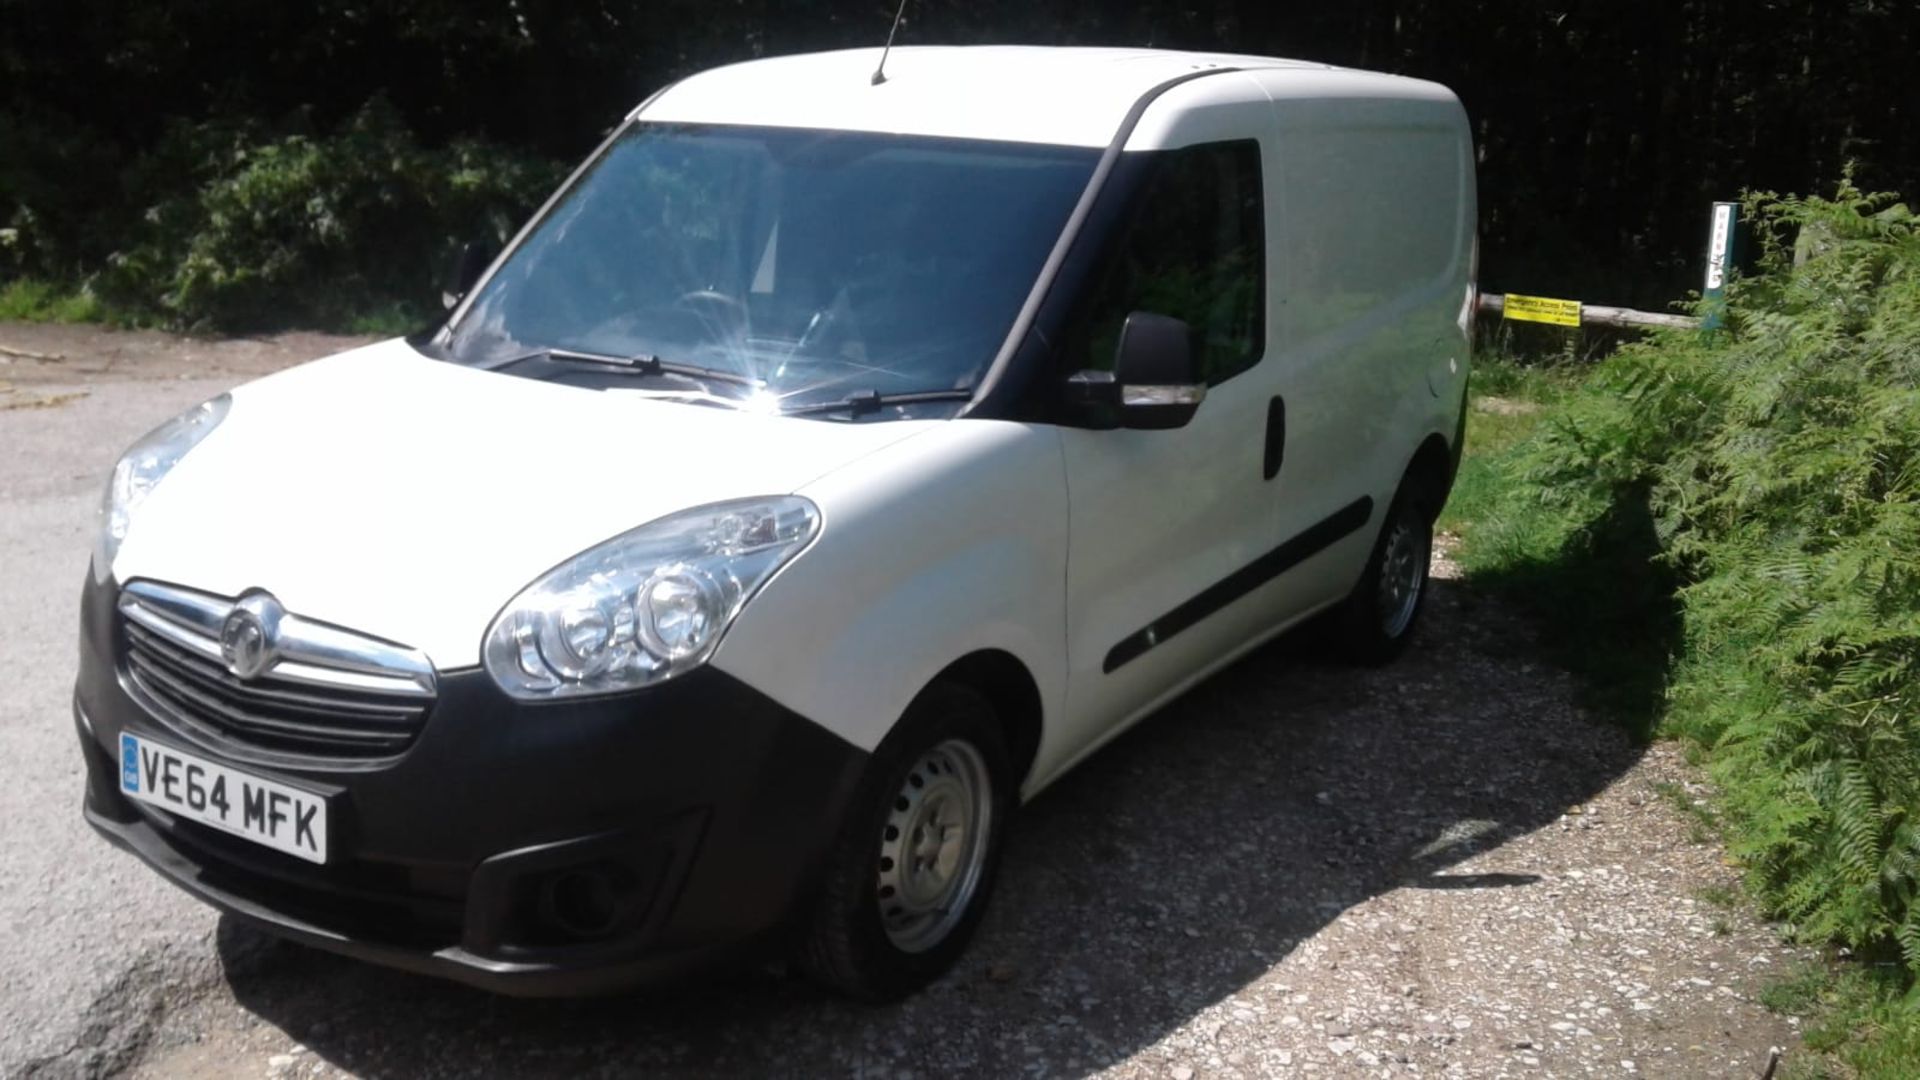 2015/64 REG VAUXHALL COMBO 2000 L1H1 CDTI SS E 1.25 DIESEL WHITE PANEL VAN, SHOWING 0 FORMER KEEPERS - Image 2 of 9